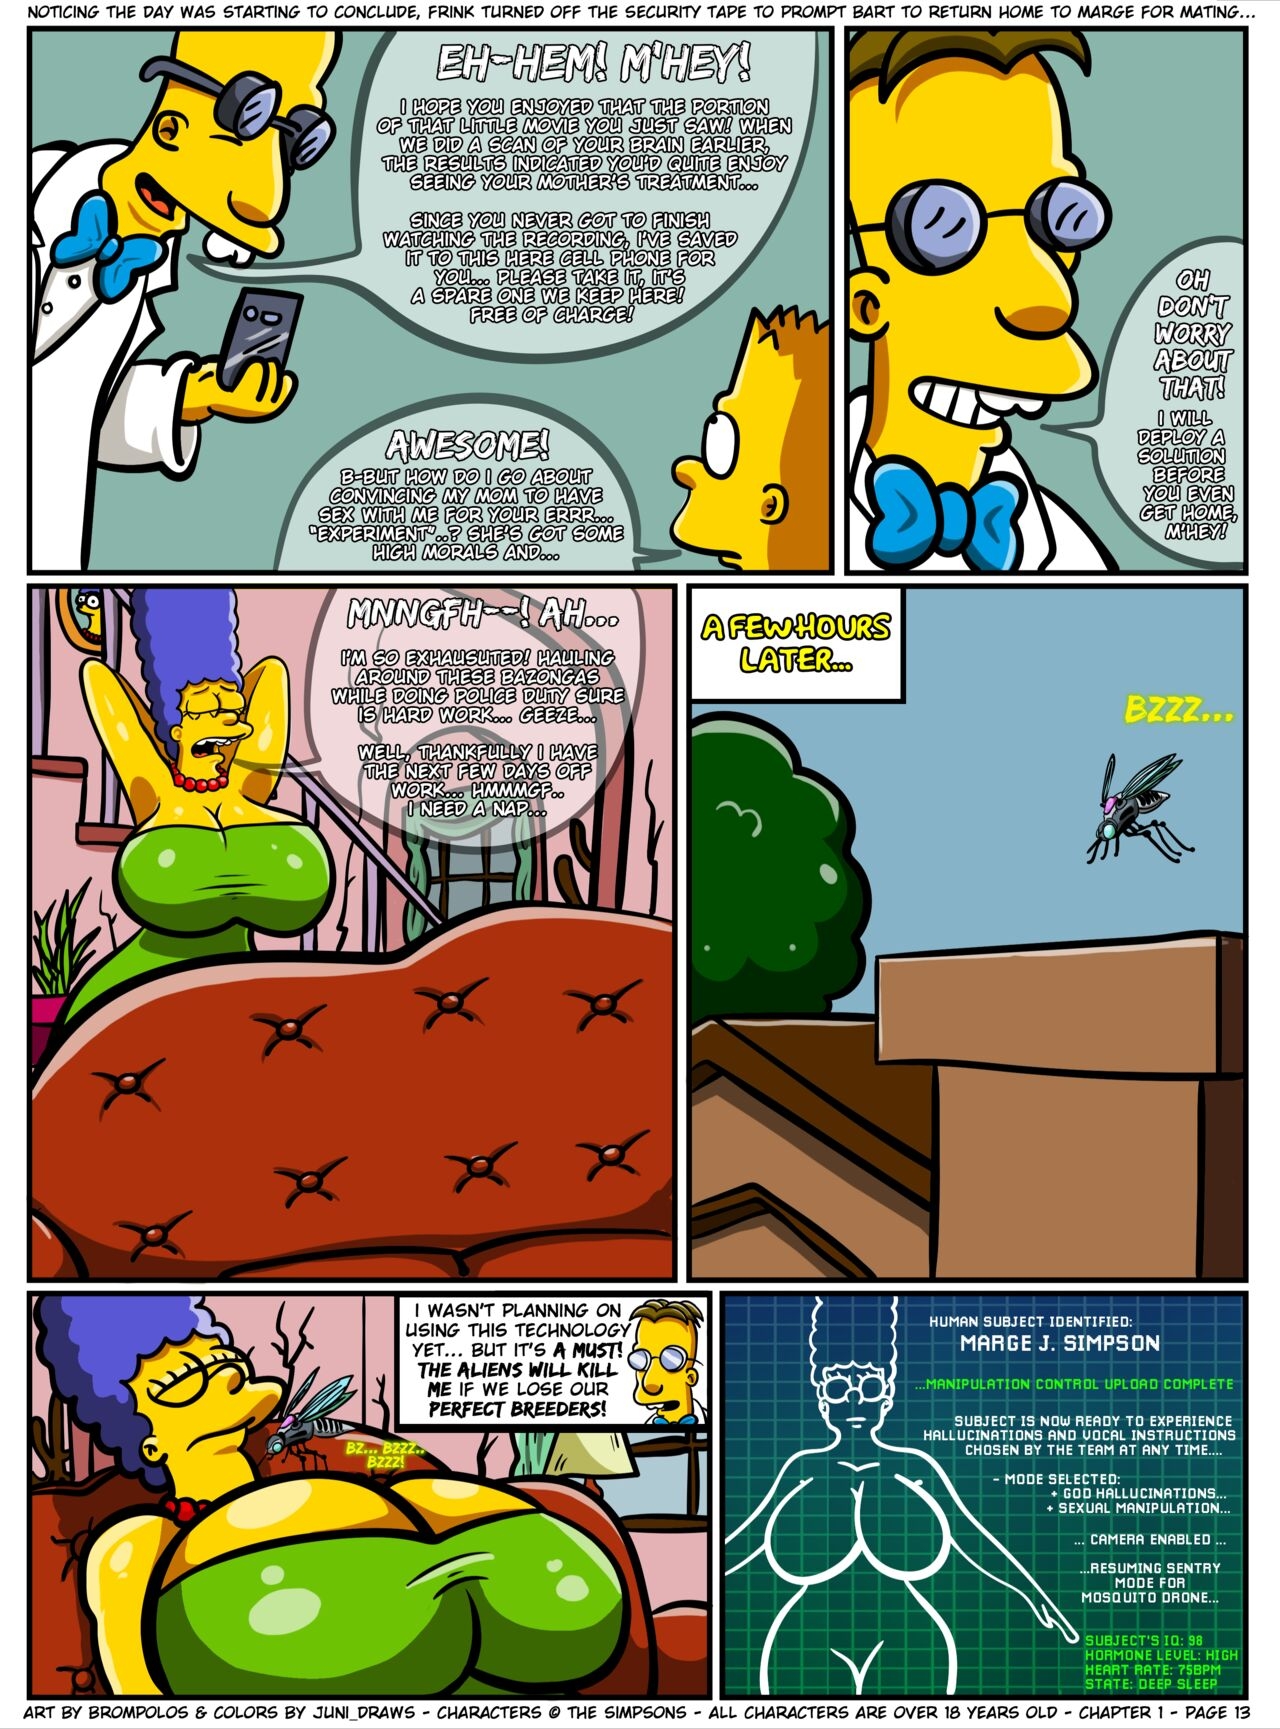 [Brompolos/Juni_Draws] The Sexensteins (Simpsons) [Ongoing] 13